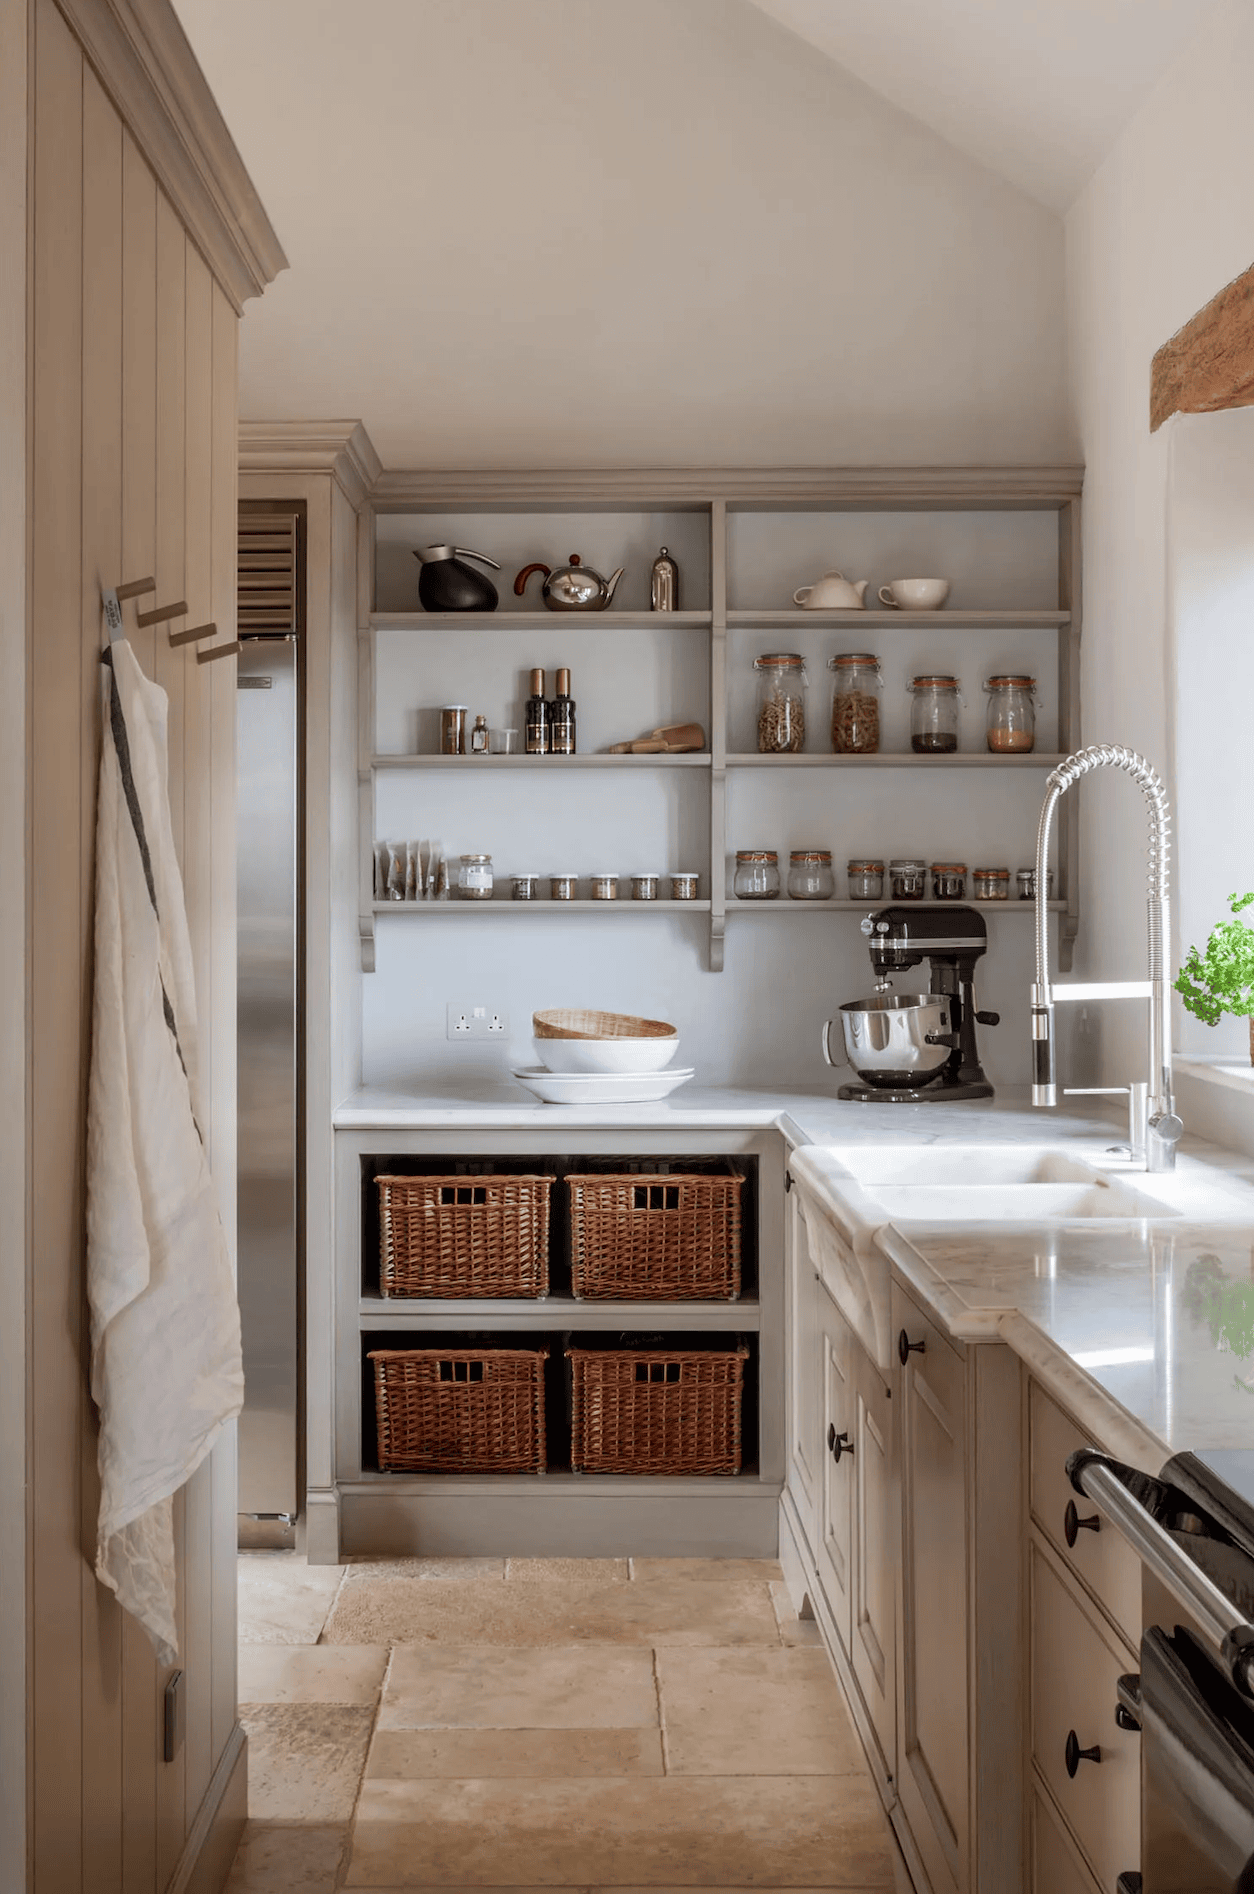 A BUTLER'S PANTRY FOR WASHING AND STASHING DIRTY DISHES